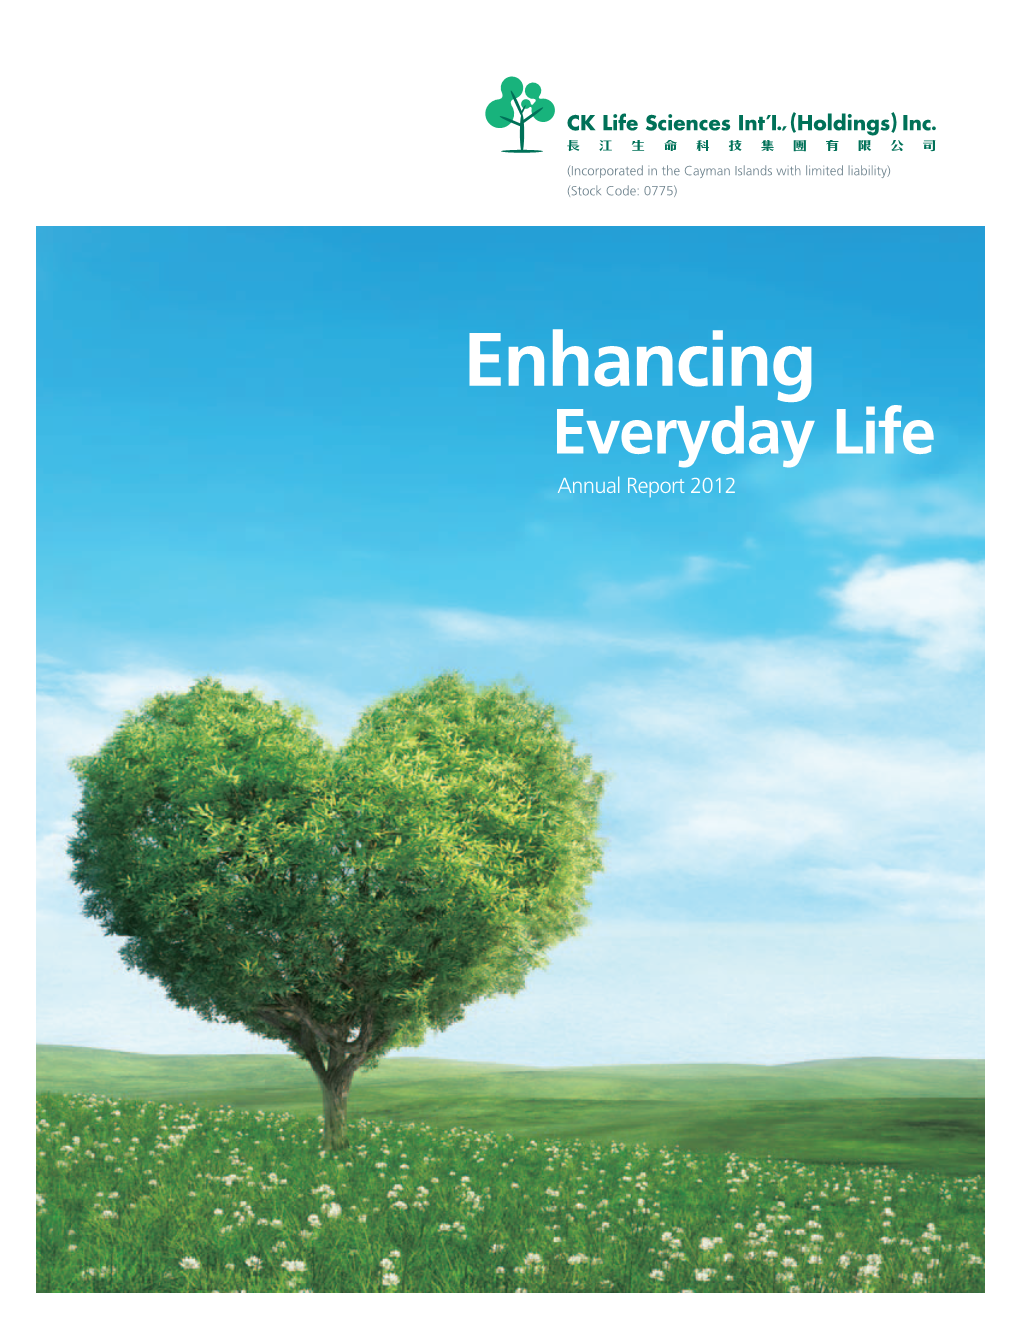 Enhancing Everyday Life Annual Report 2012